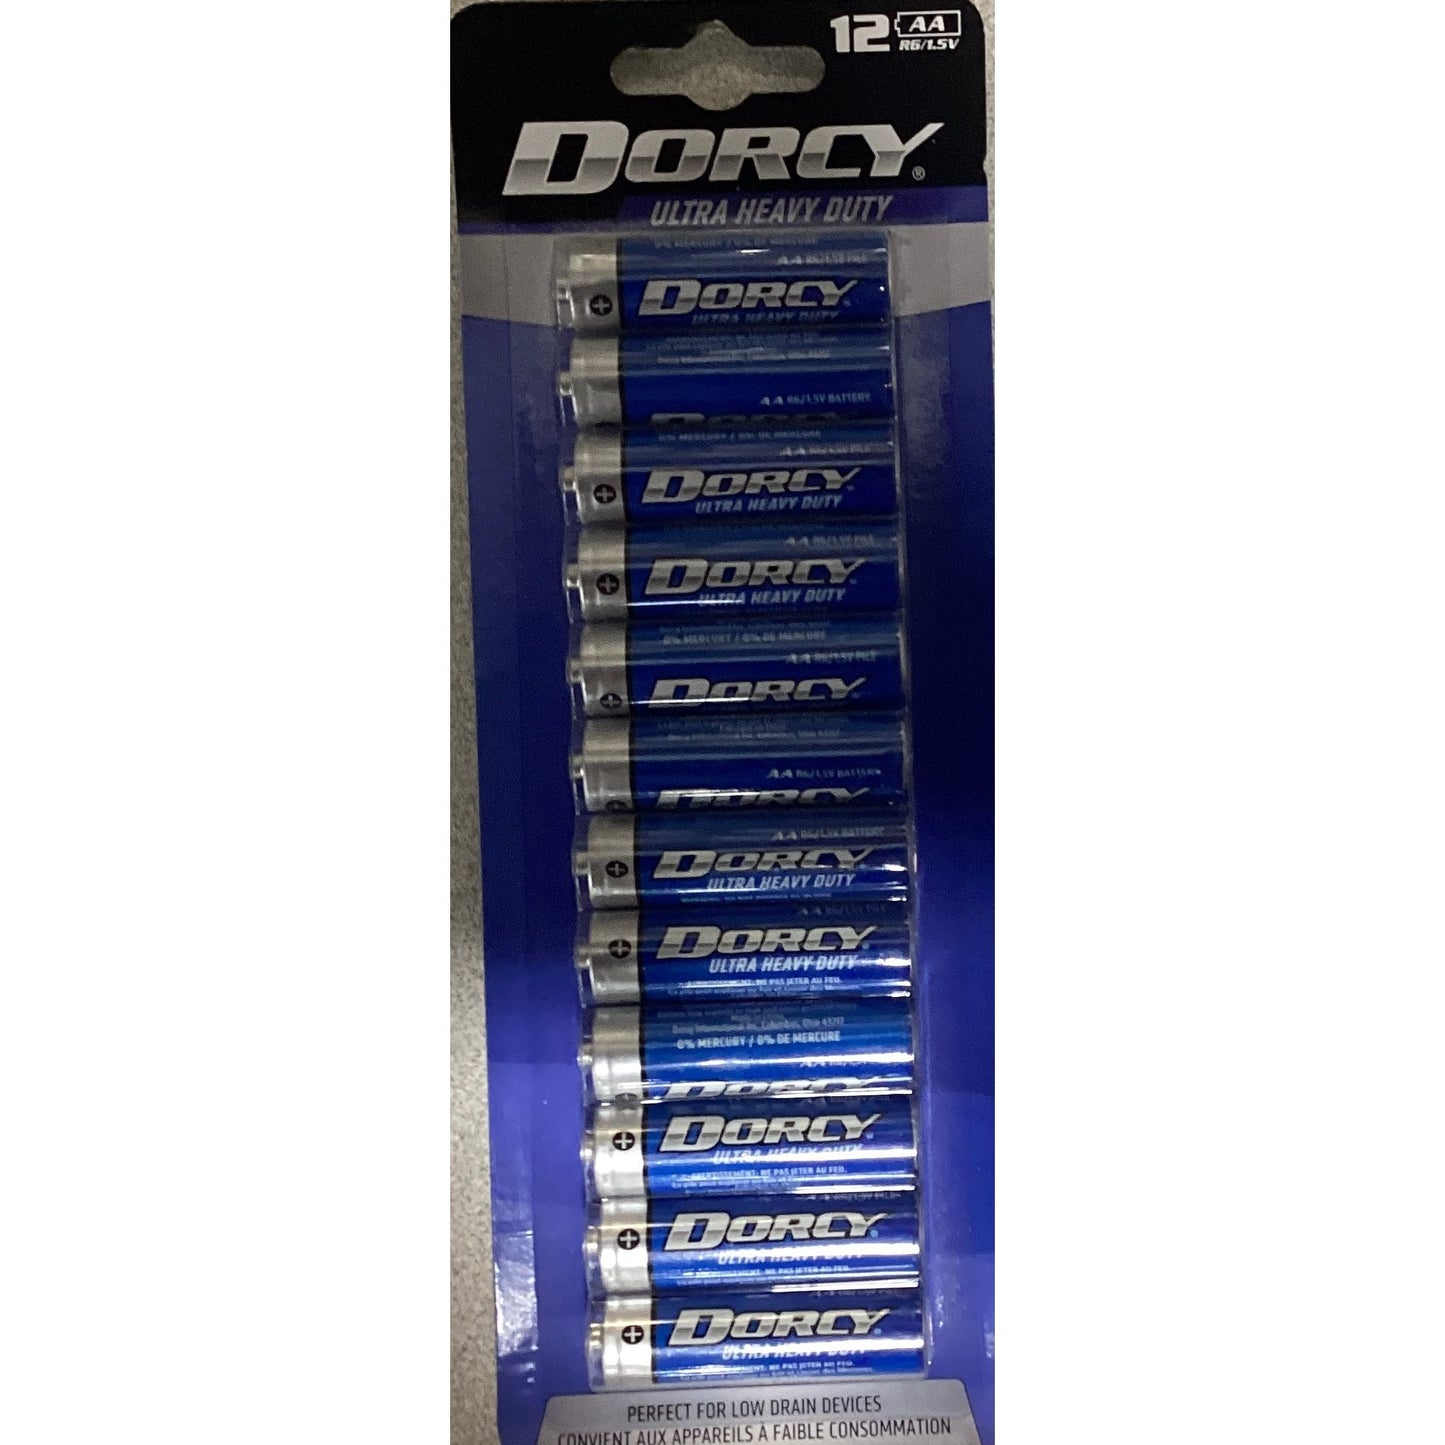 Dorey Ultra High Power AA Batteries 12 Pack: Reliable and long-lasting energy source for your devices.